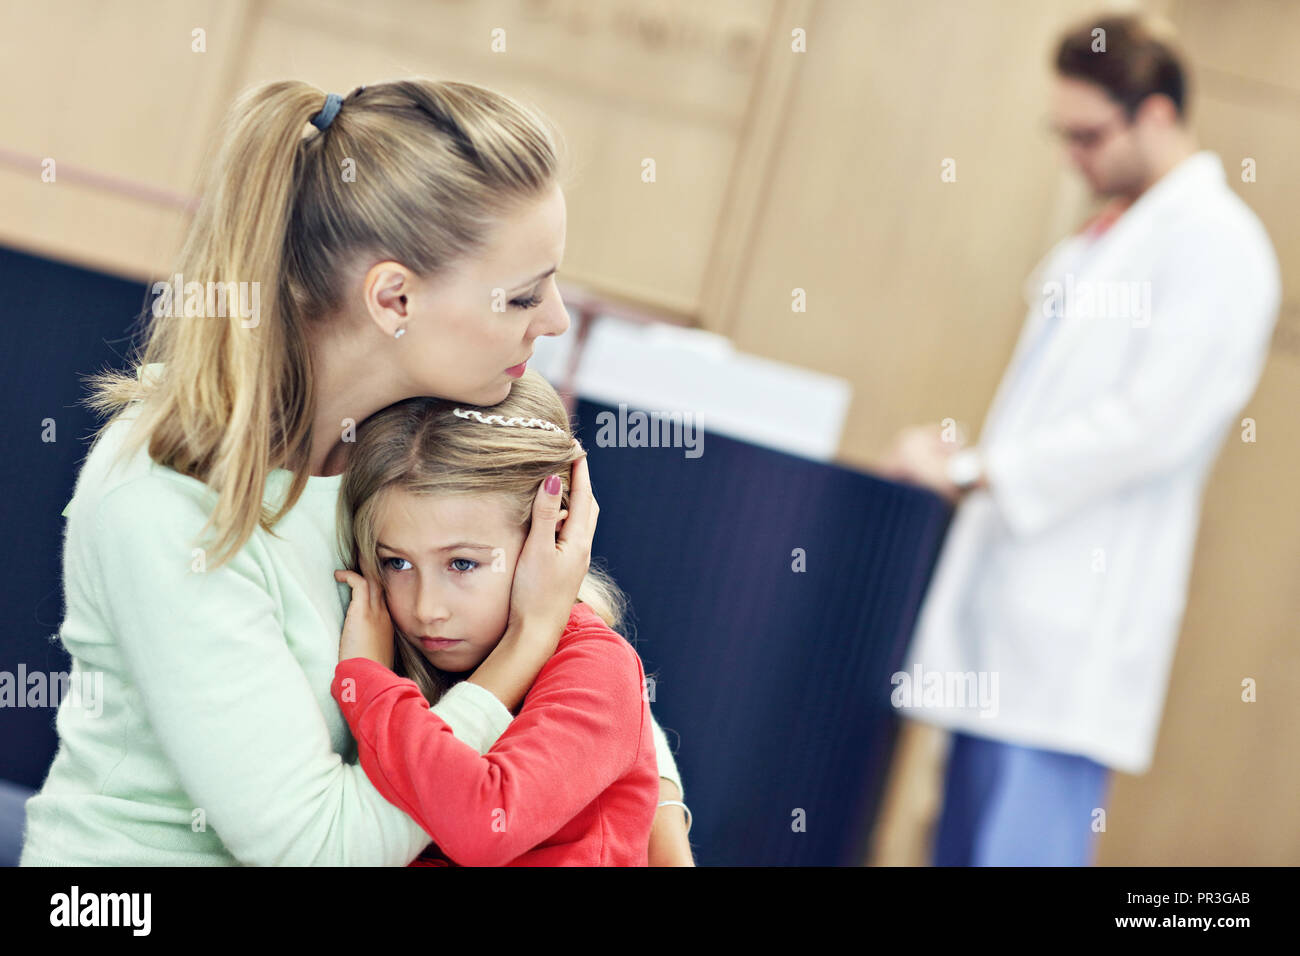 Little girl is crying while with her mother at a doctor on consultation Stock Photo